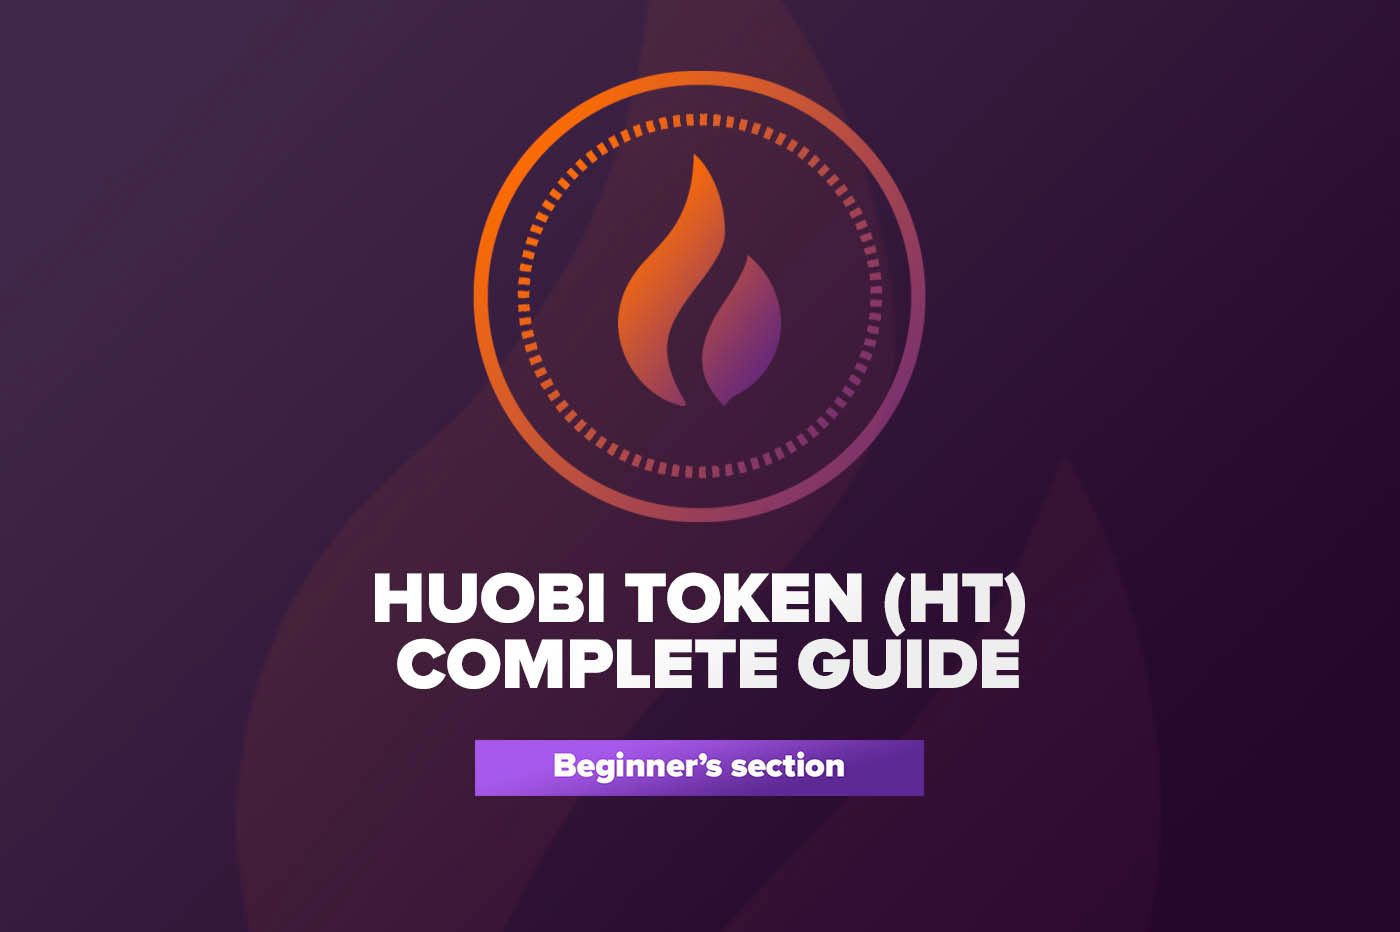 All You Need to Know About Huobi Token: Complete Guide